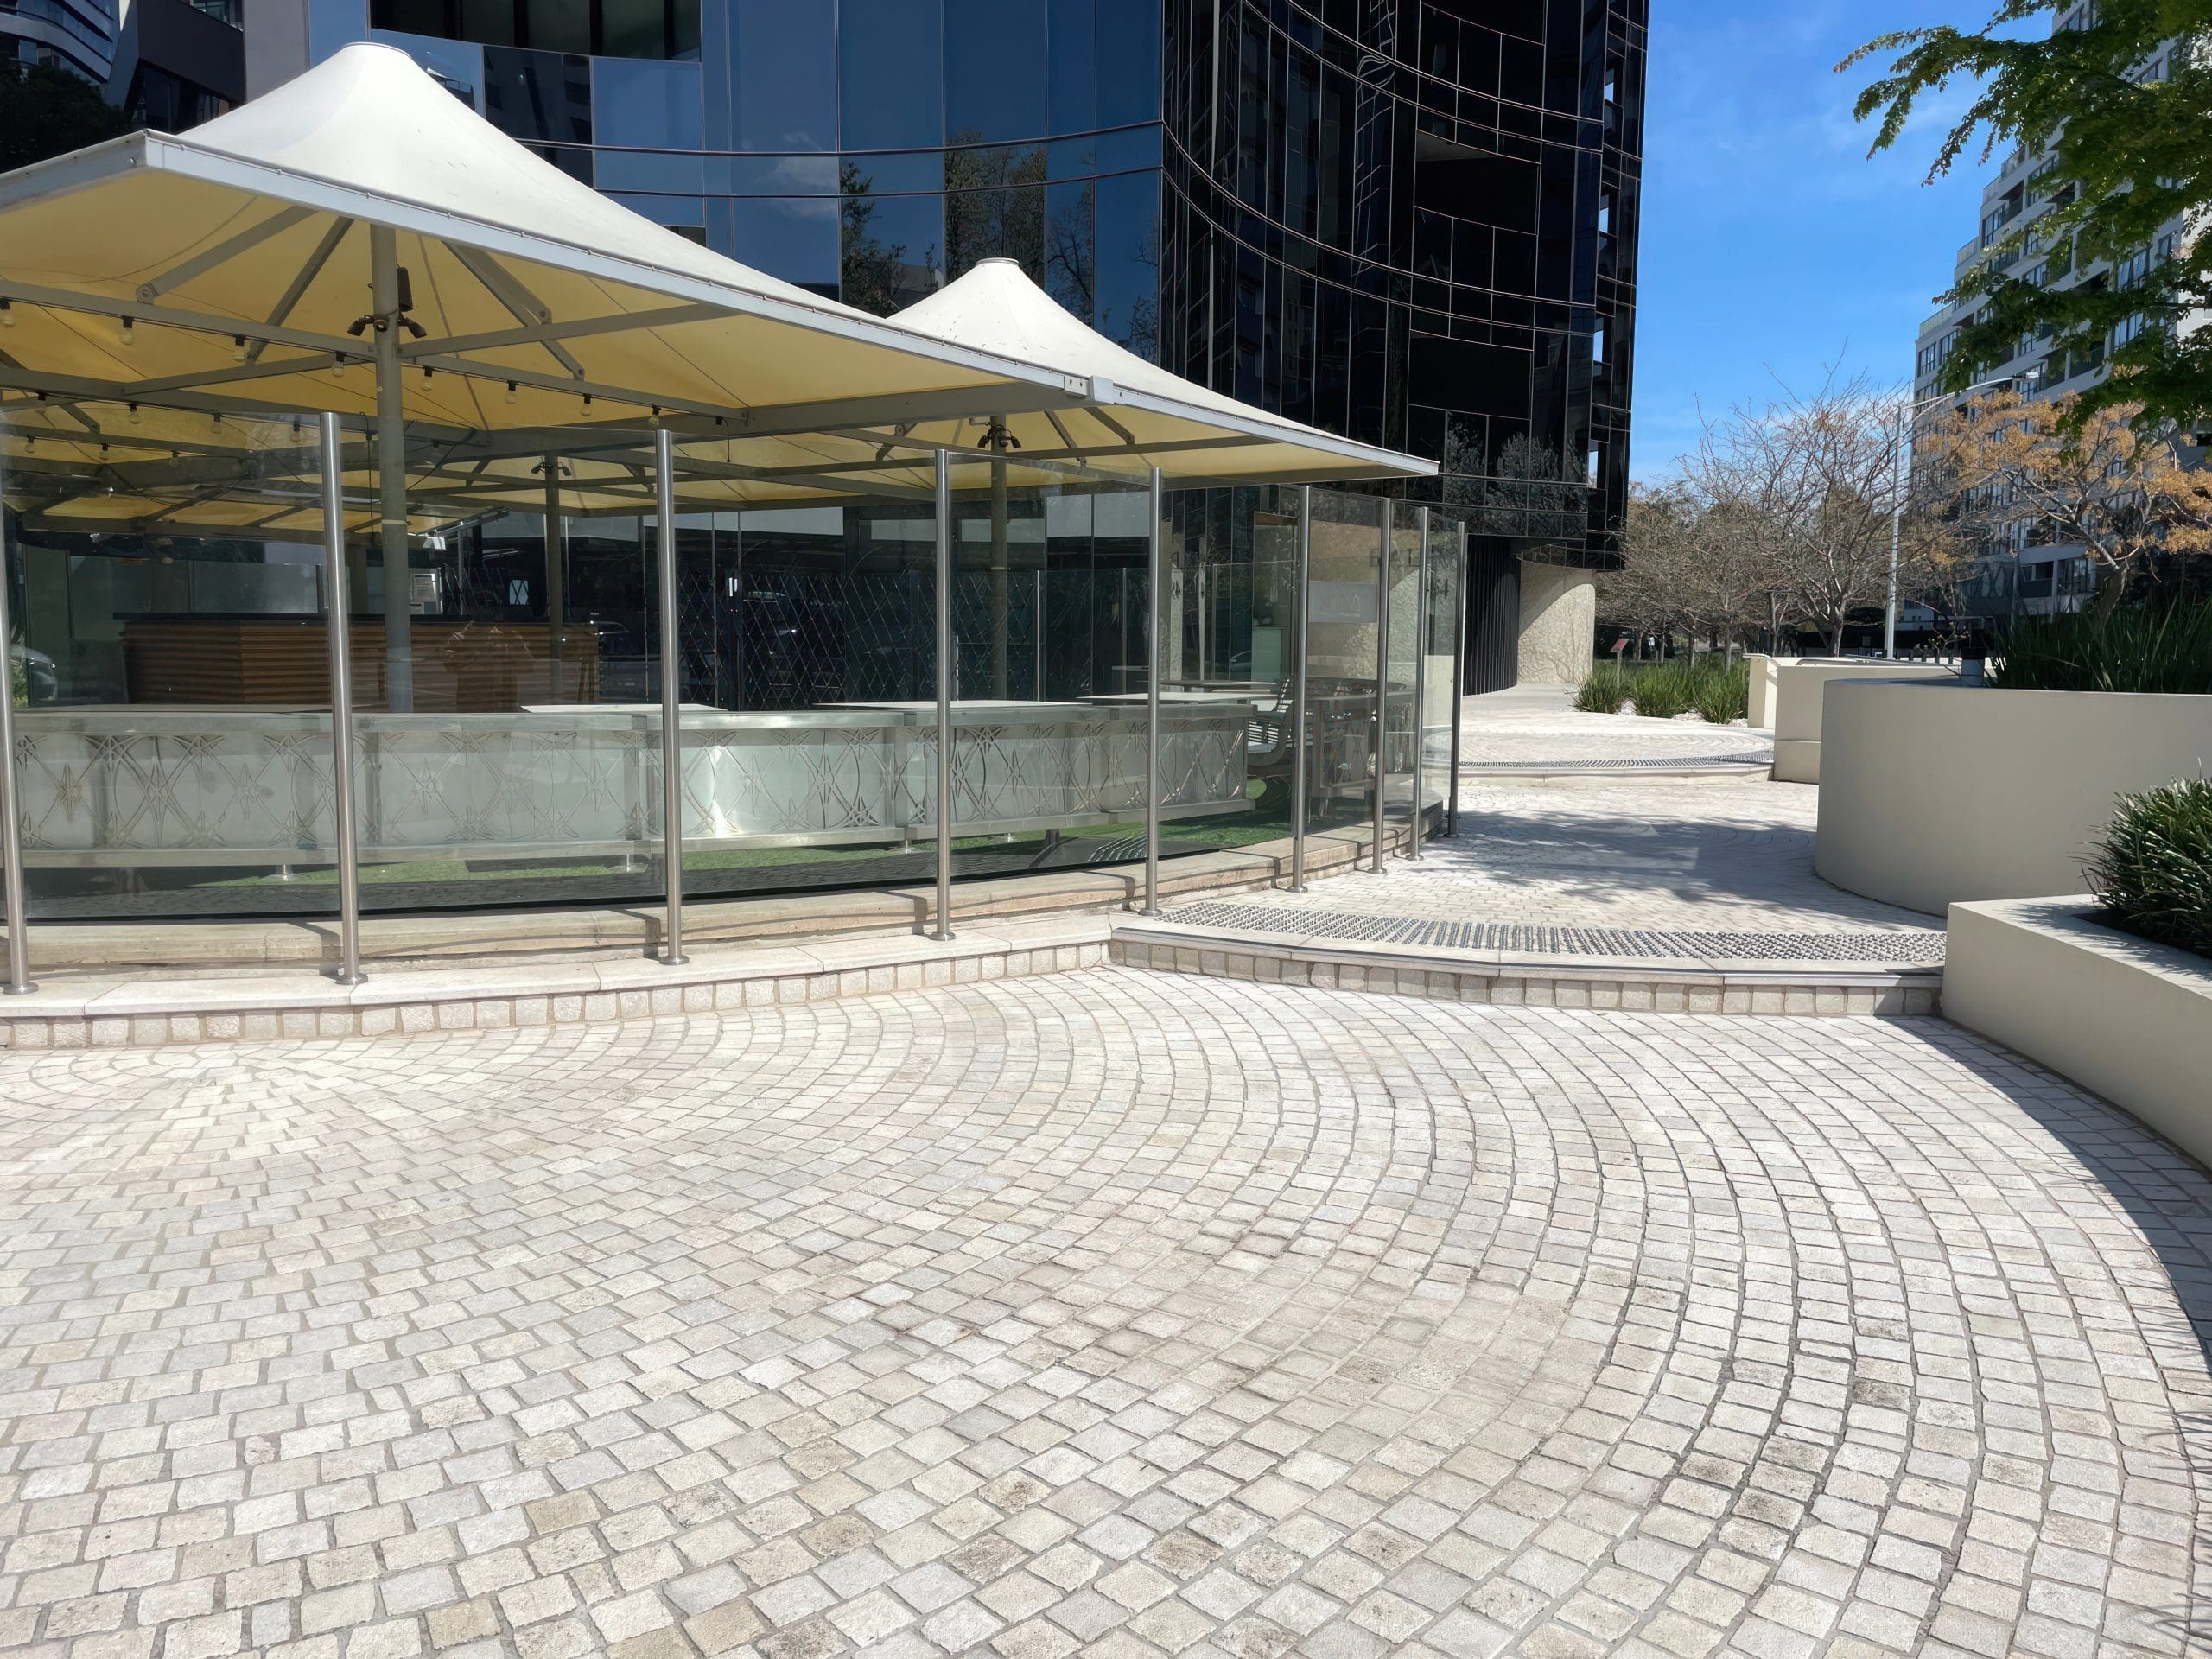 SUNSET GRANITE COBBLESTONES_RMS TRADERS_NATURAL STONE DRIVEWAY FOOTPATHS EXTERNAL SUPPLIER MELBOURNE (1)